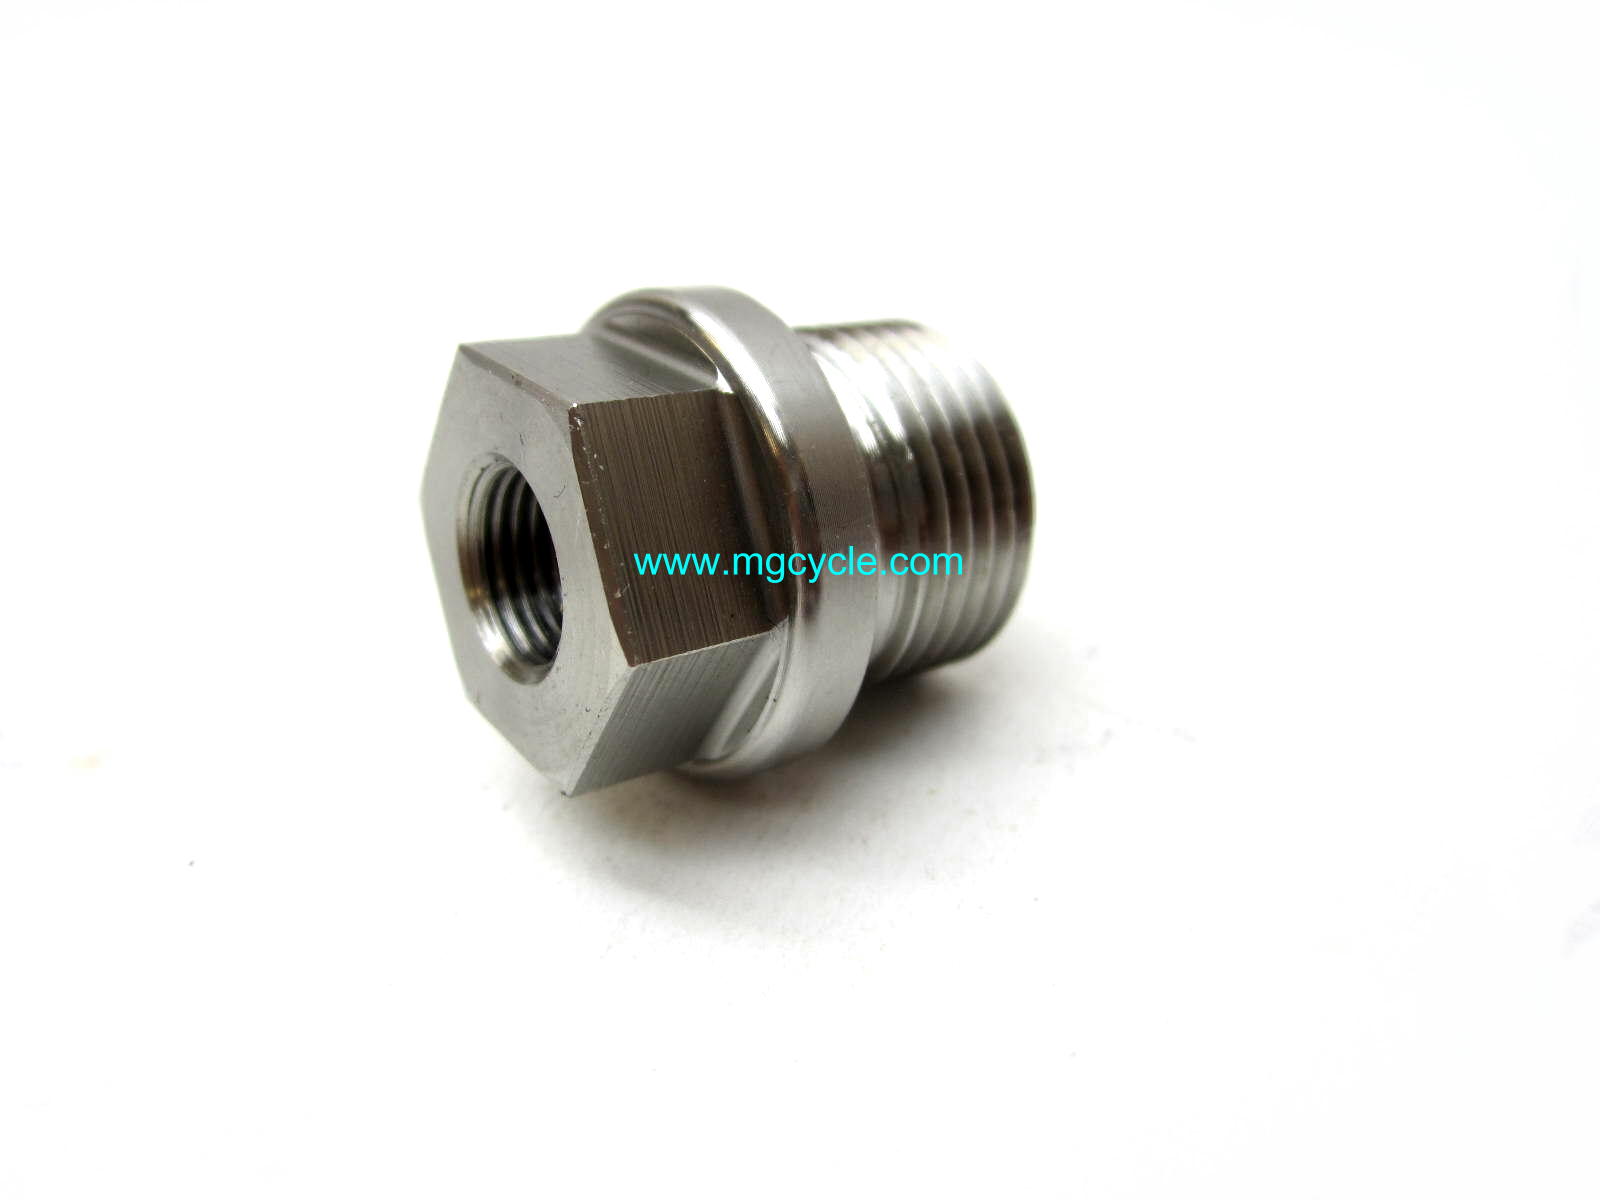 Oil drain plug, stainless steel, hex head, with hole